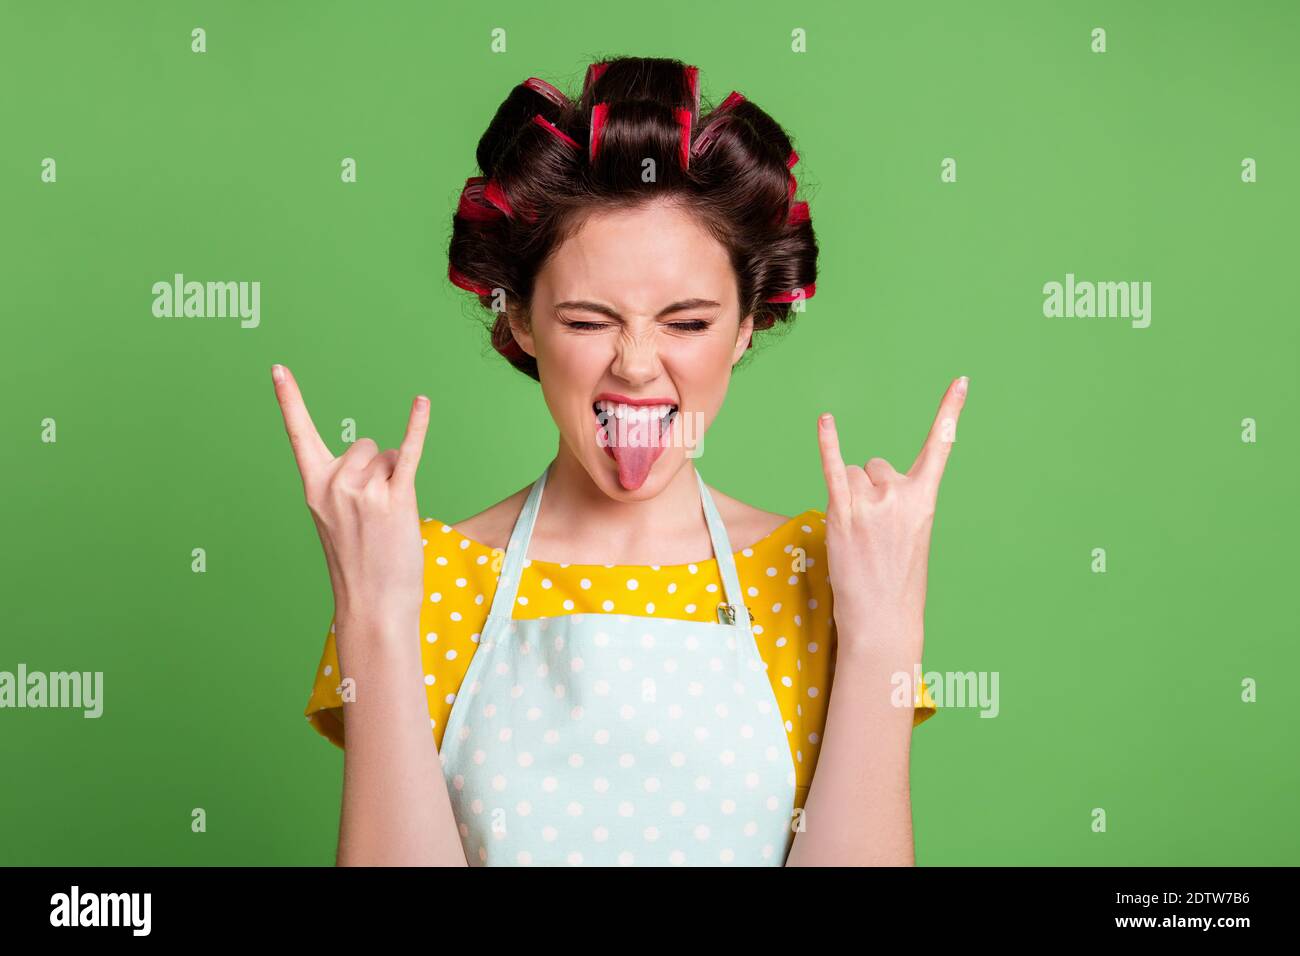 Close-up portrait of her she nice attractive cool naughty glamorous cheerful cheery crazy maid wearing curlers showing double horn symbol grimacing Stock Photo